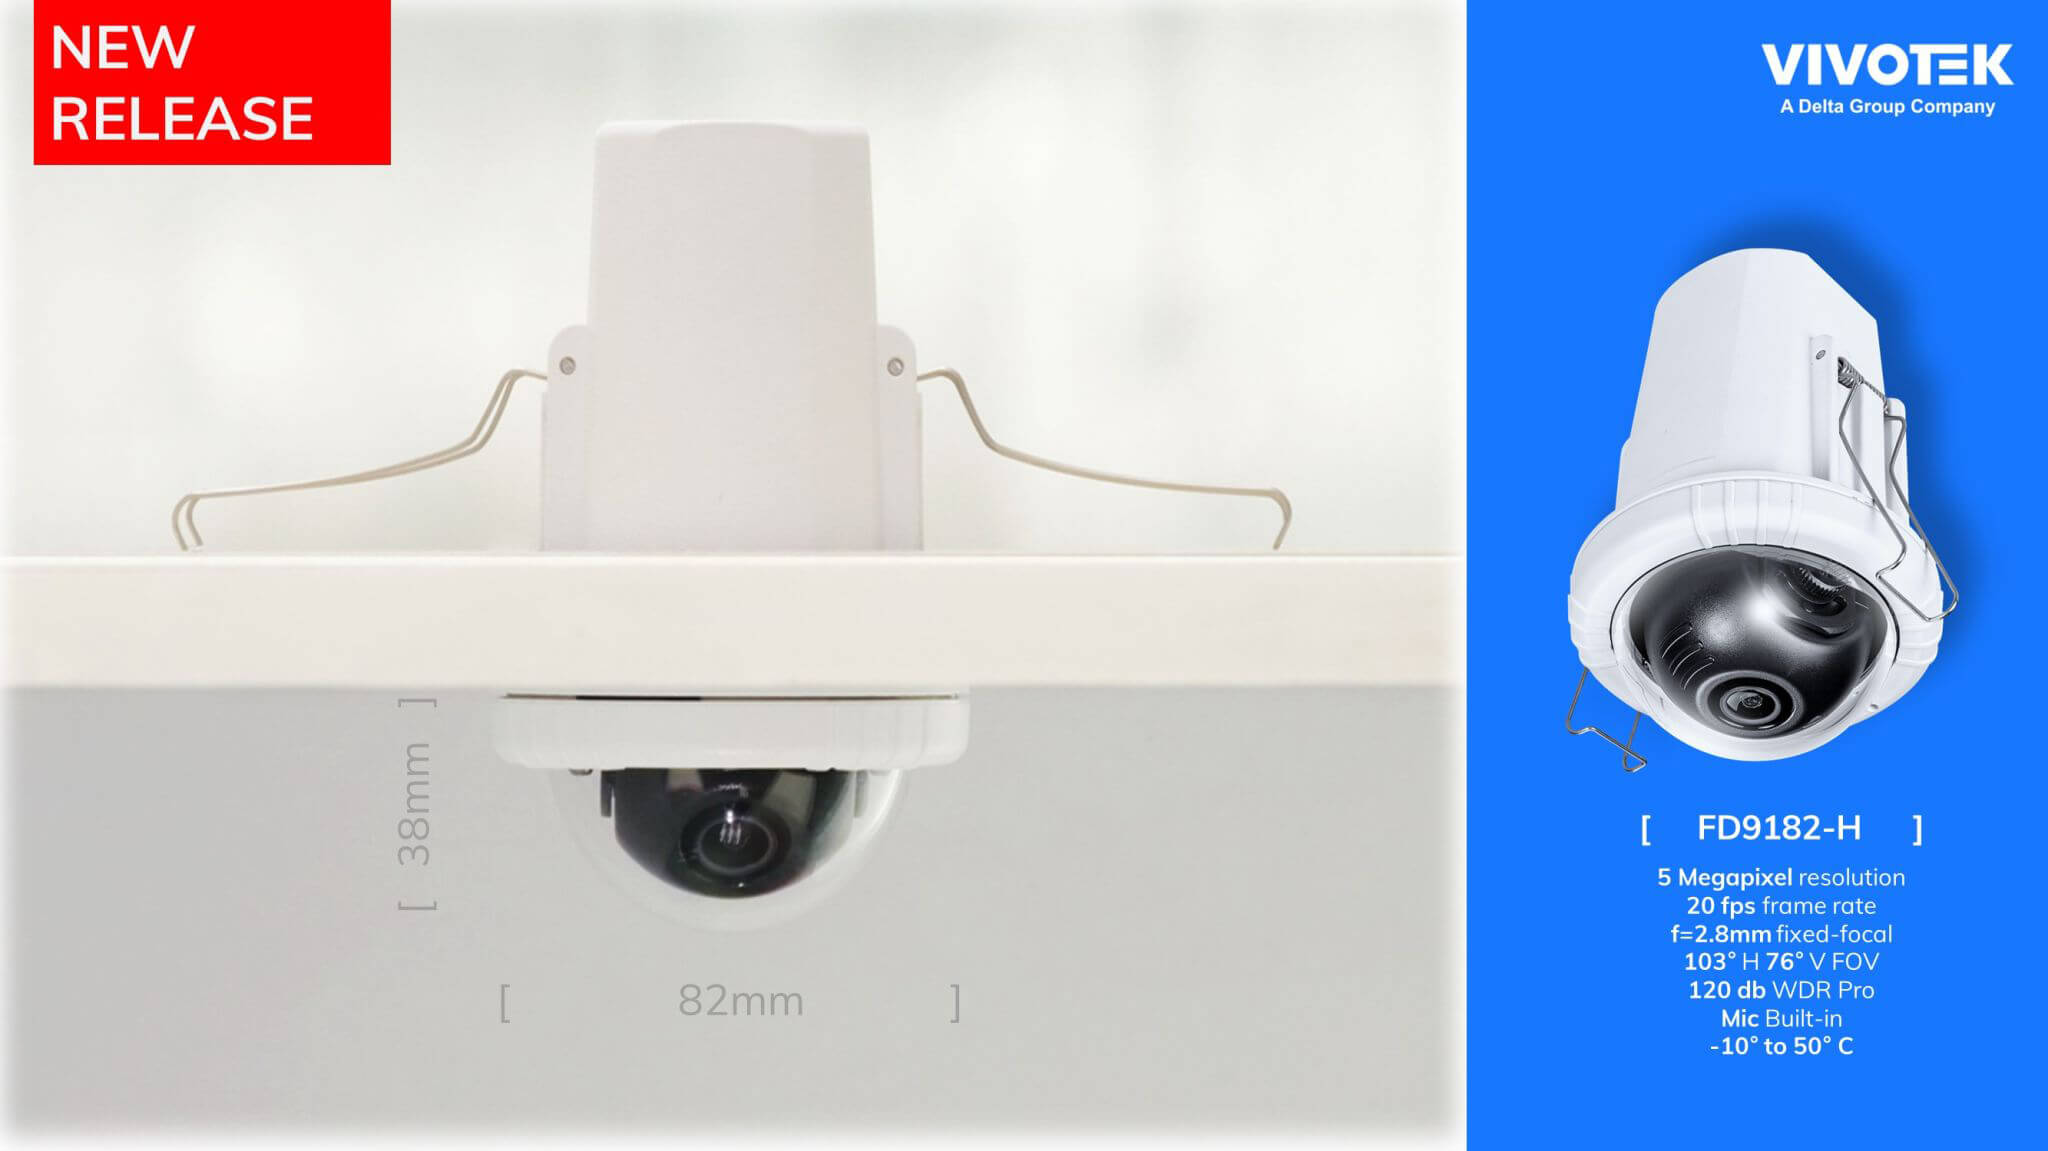 VIVOTEK launches FD9182-H compact recessed dome network camera